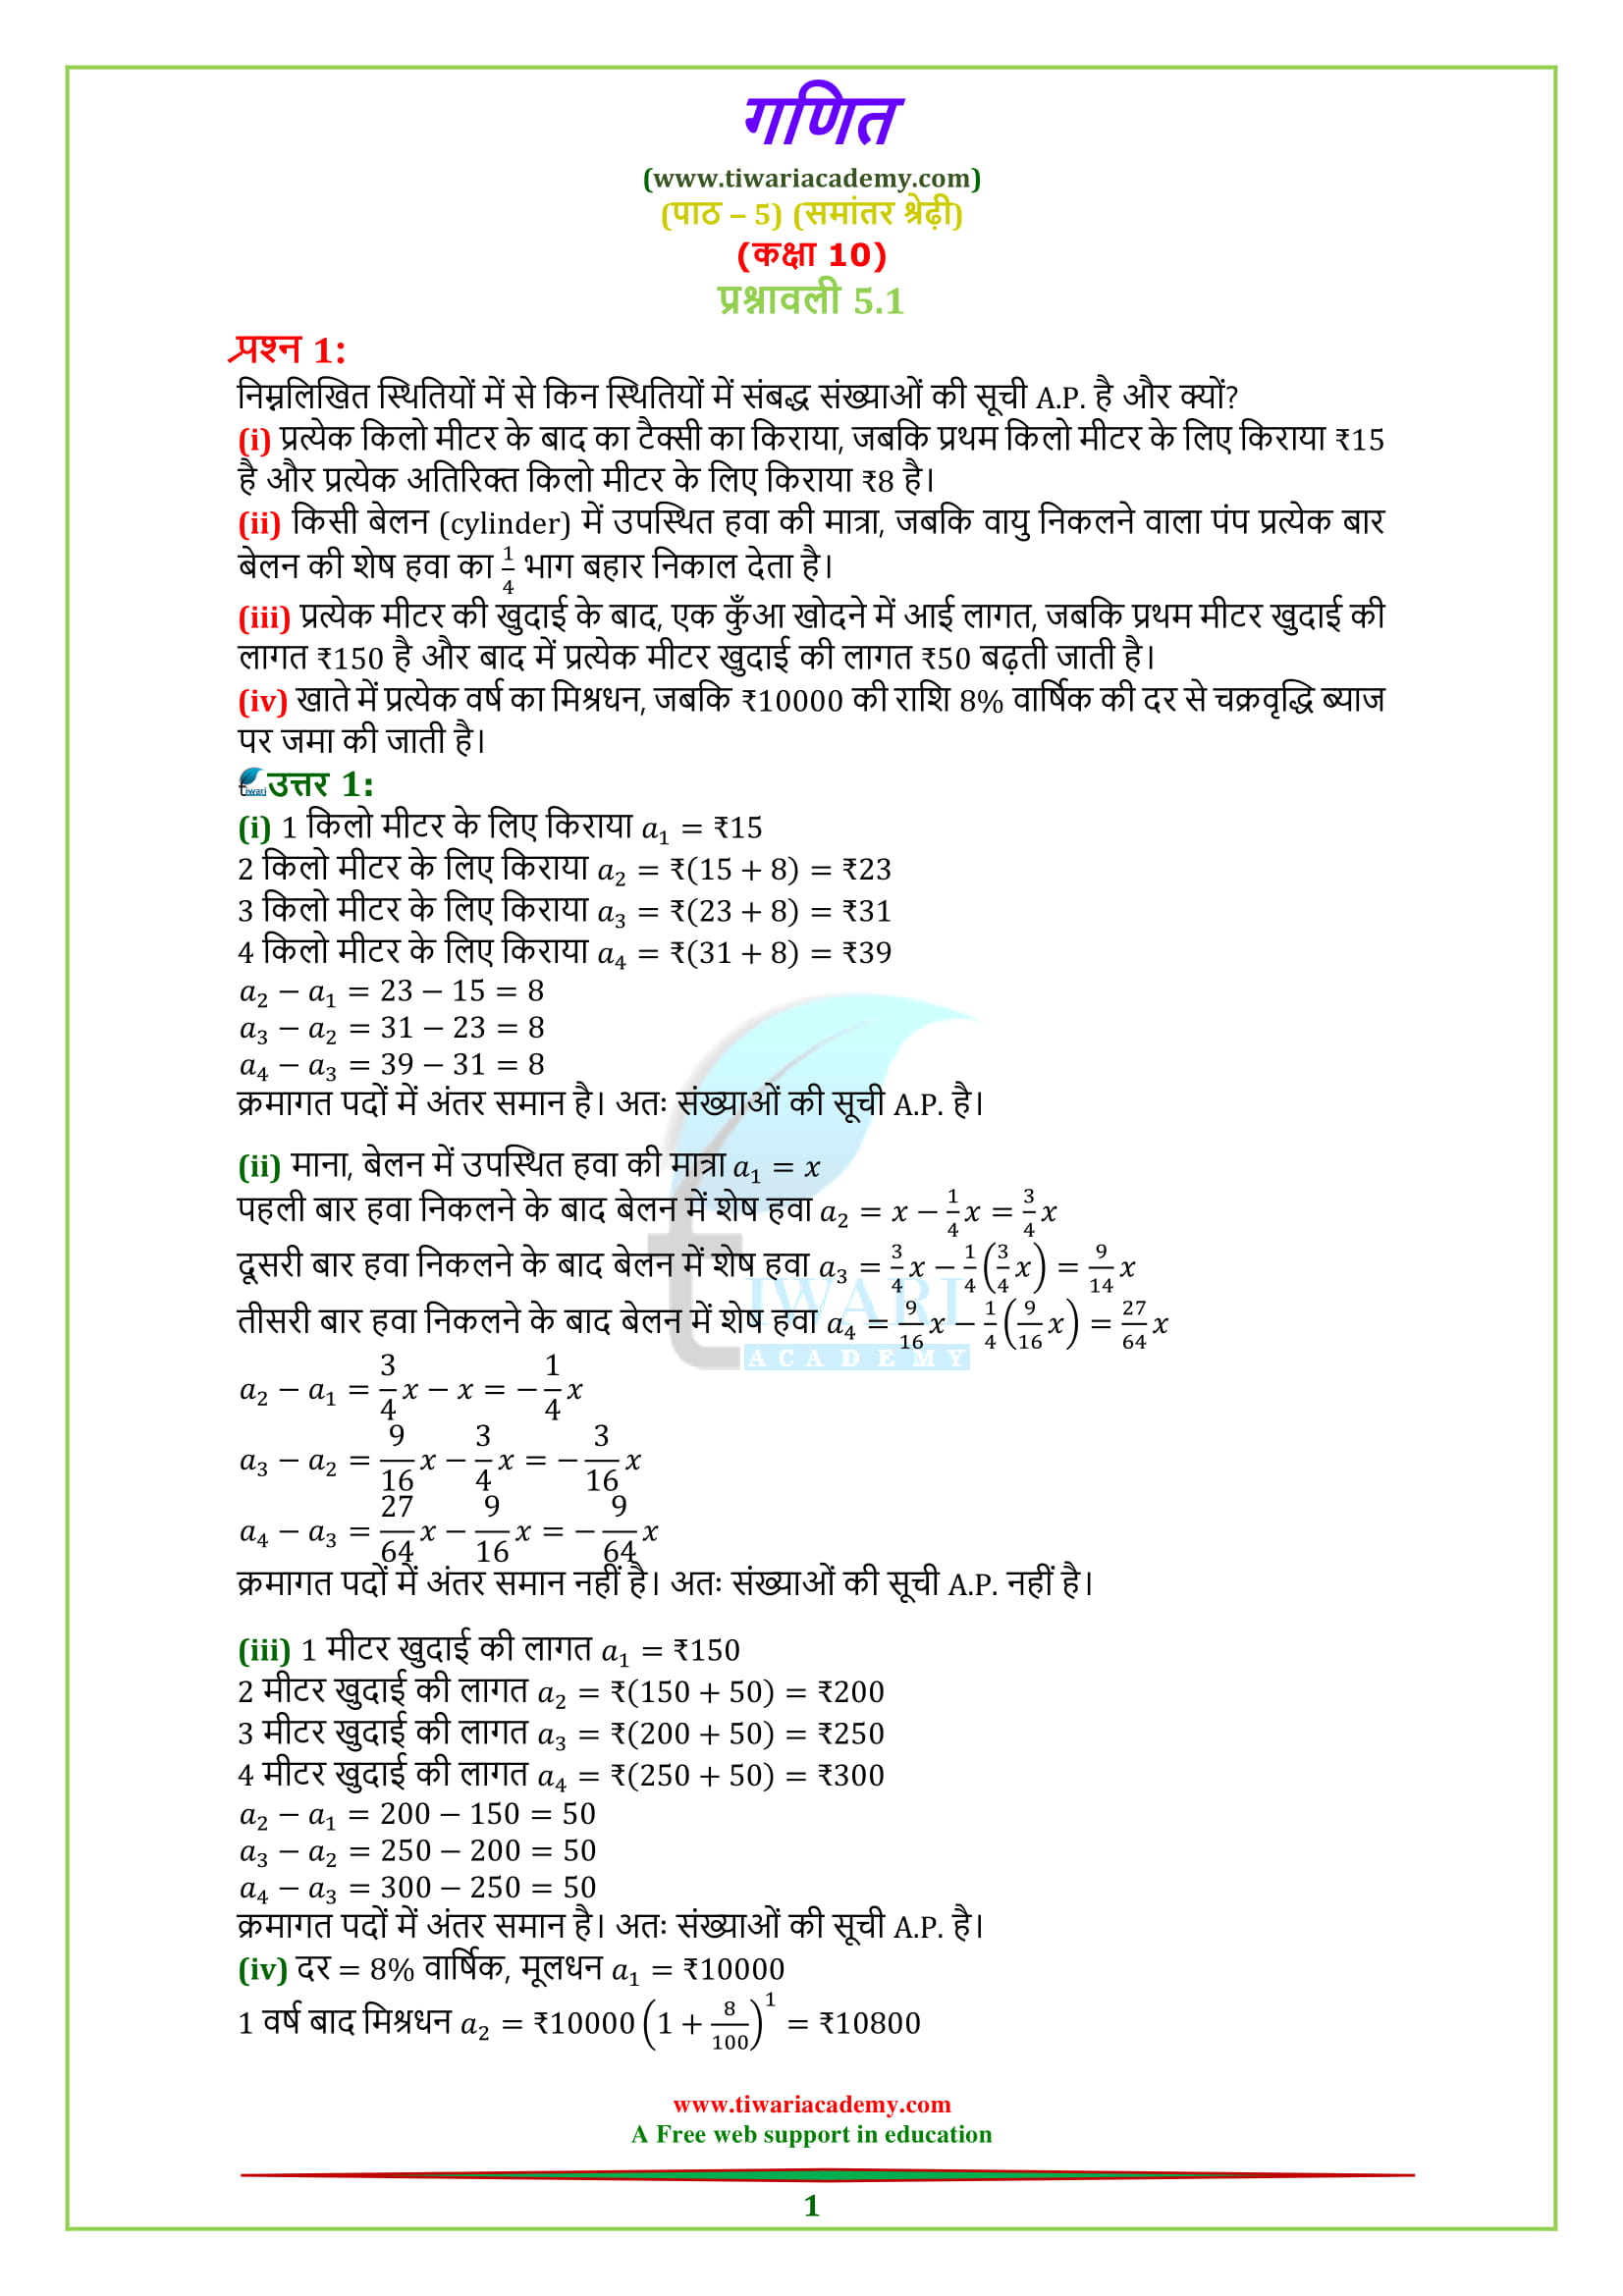 NCERT Solutions for class 10 Maths Chapter 5 Exercise 5.1 AP in Hindi Medium